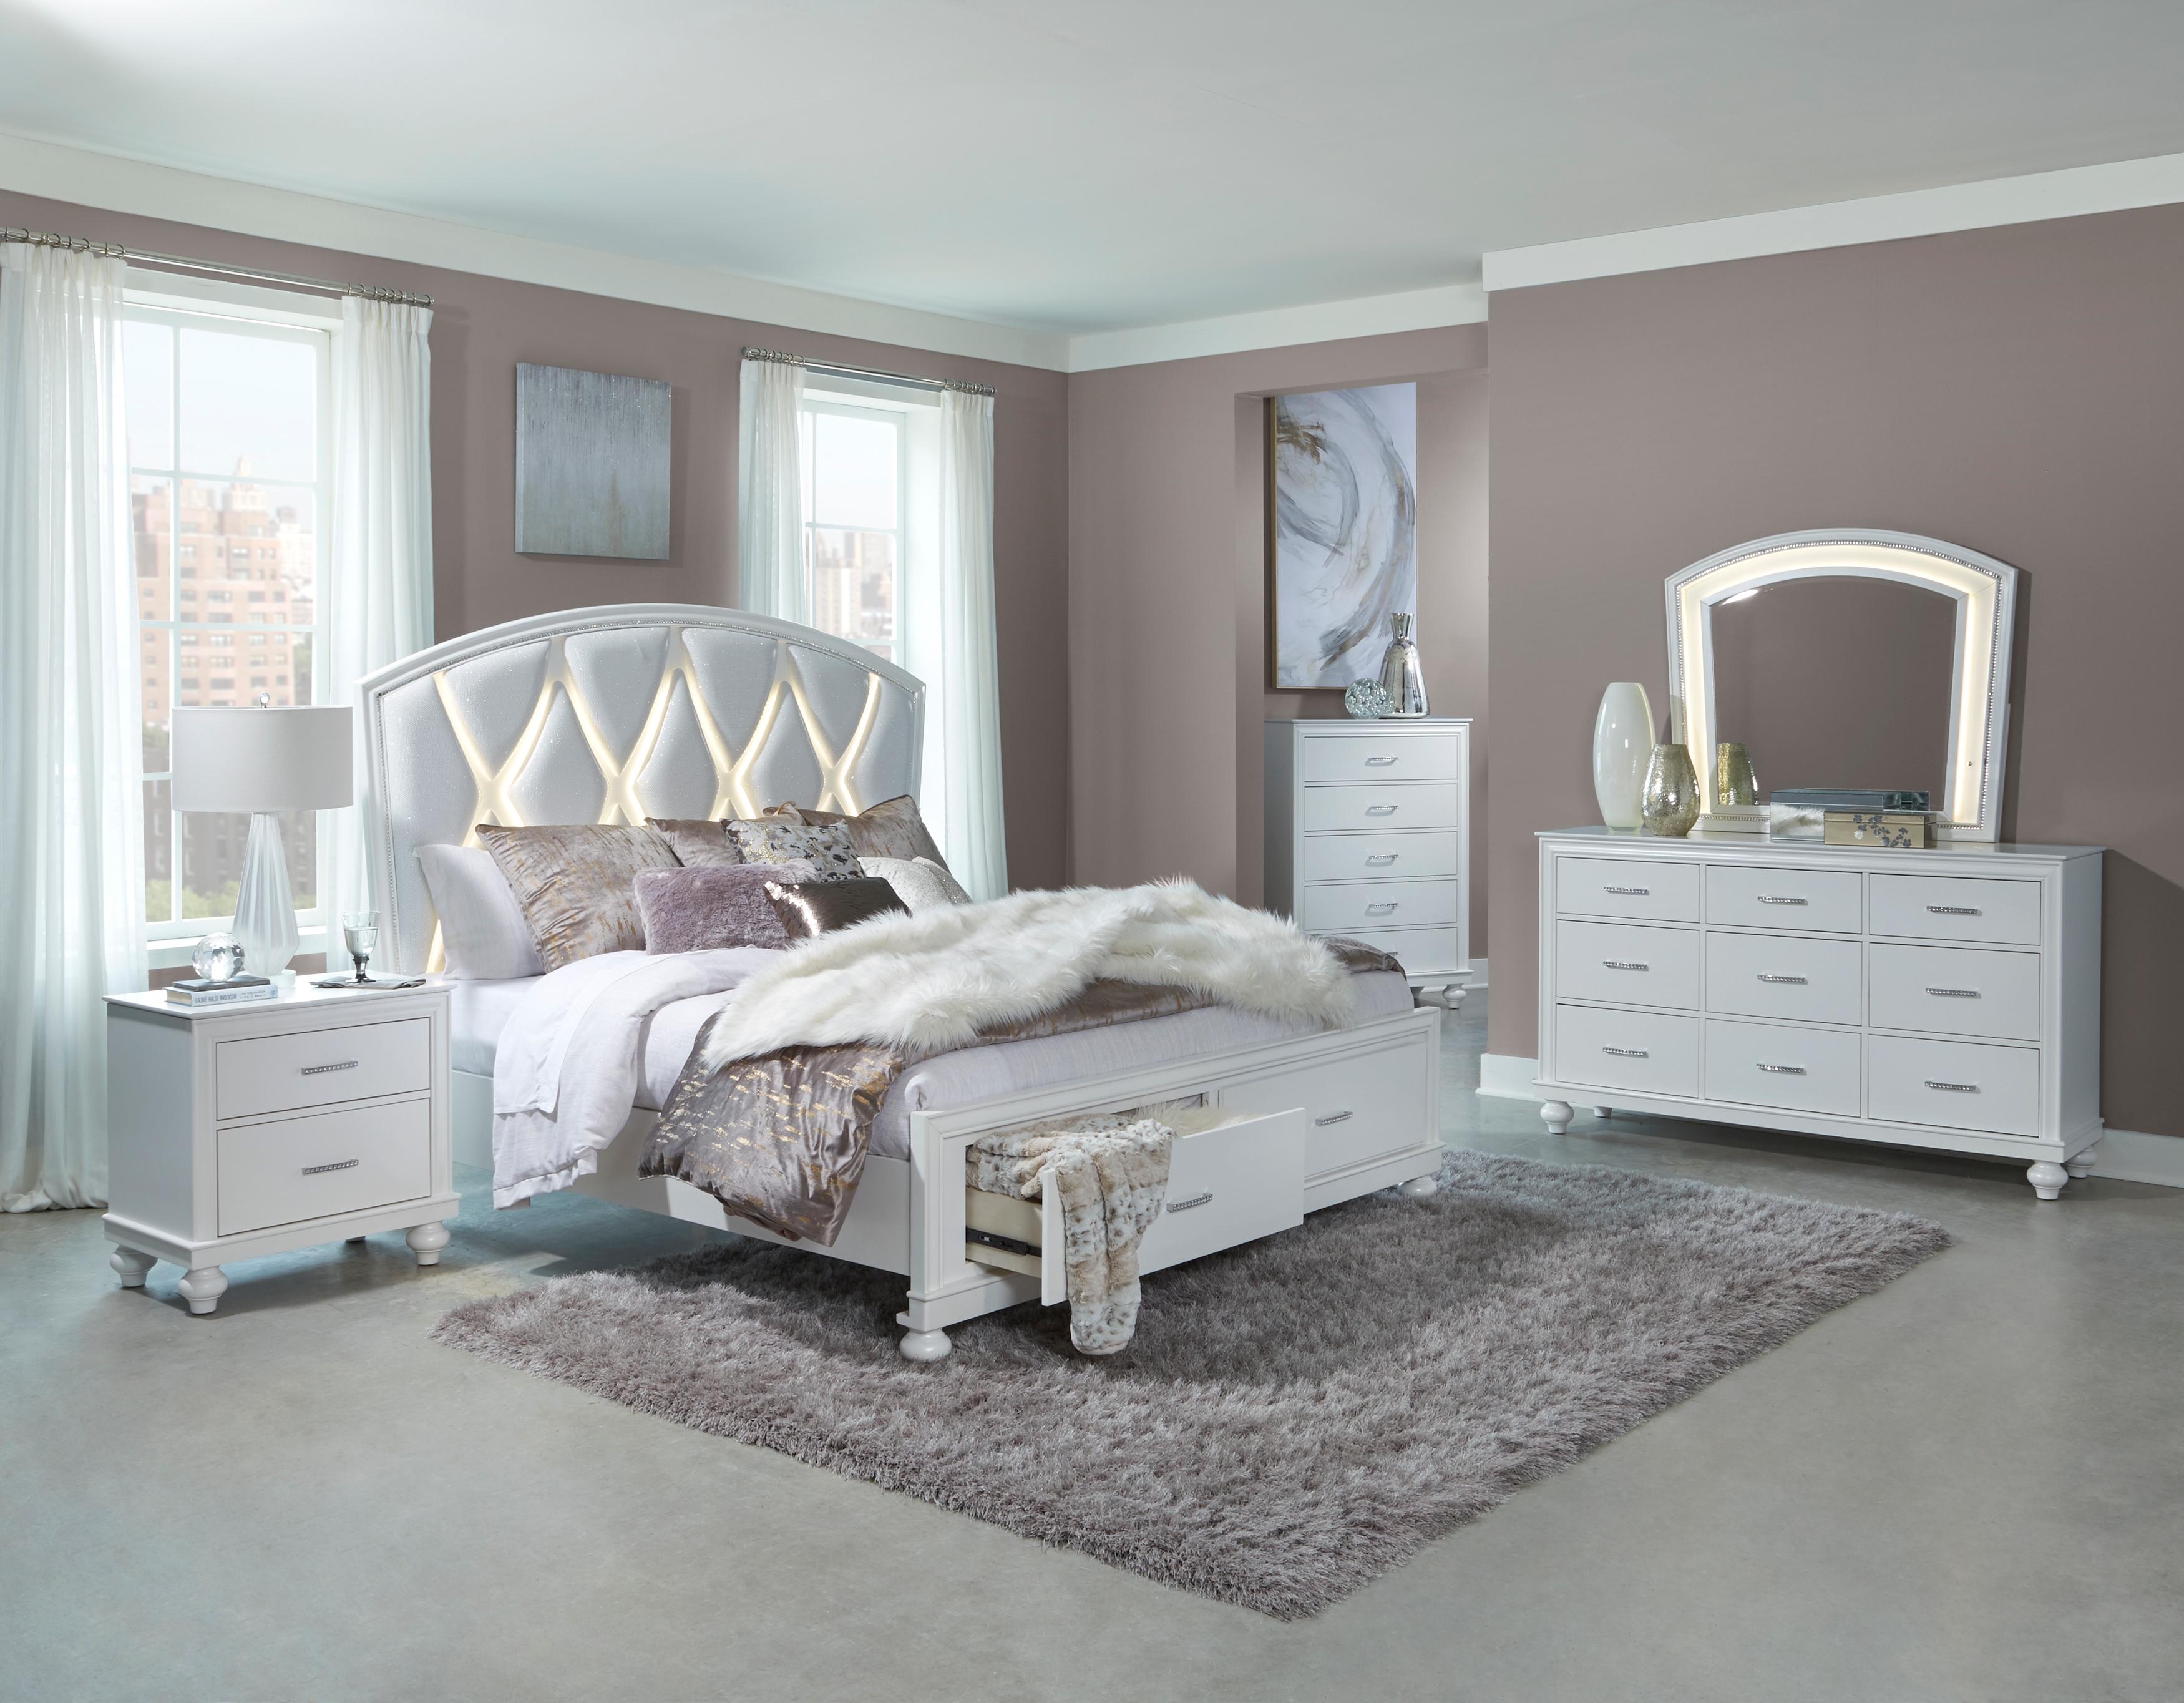 Modern Platform Bedroom Set Aria Collection Queen Platform Bedroom Set 6PCS 1436W-1-Q-6PCS 1436W-1-Q-6PCS in White Finish Faux Leather